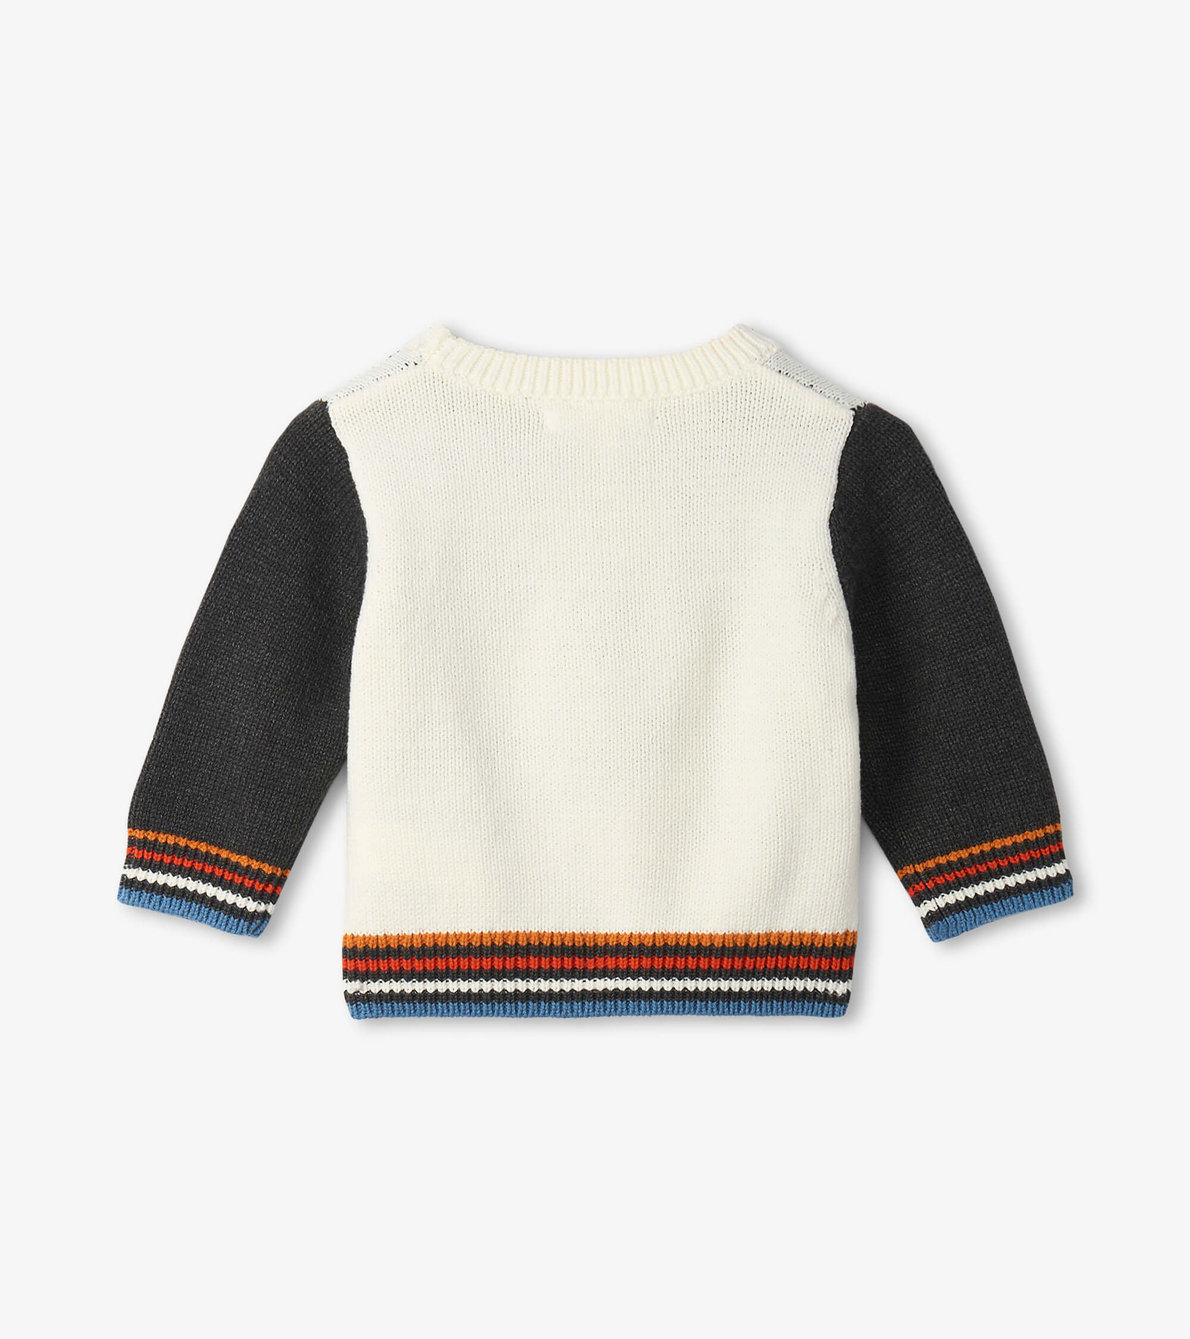 View larger image of Happy Penguin Baby Sweater